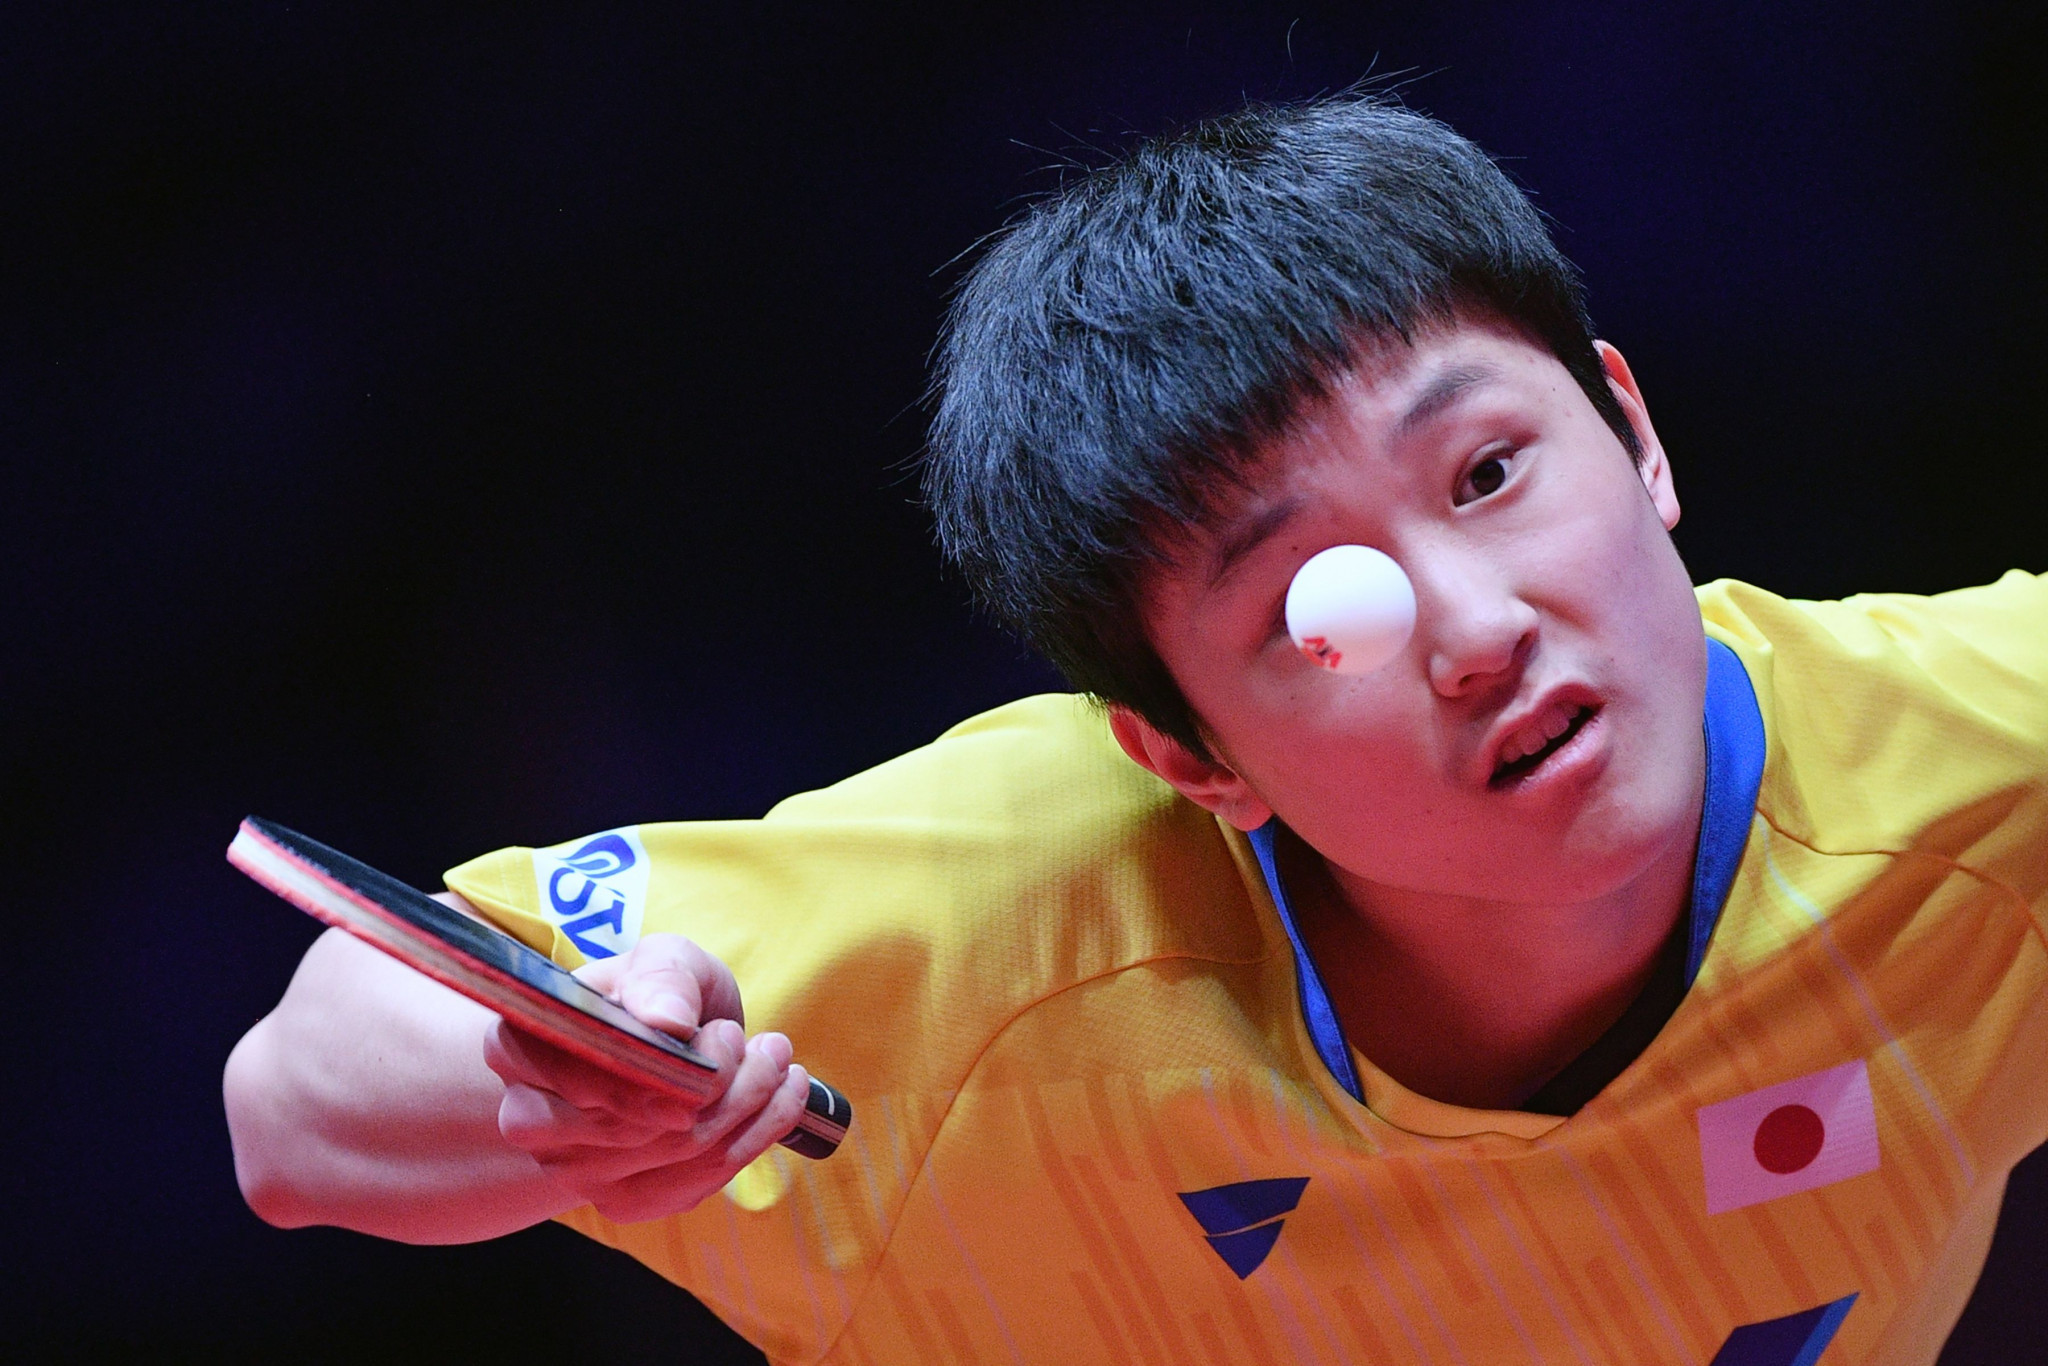 It is claimed that elite players such as Tomokazu Harimoto will be showcases better by WTT ©Getty Images